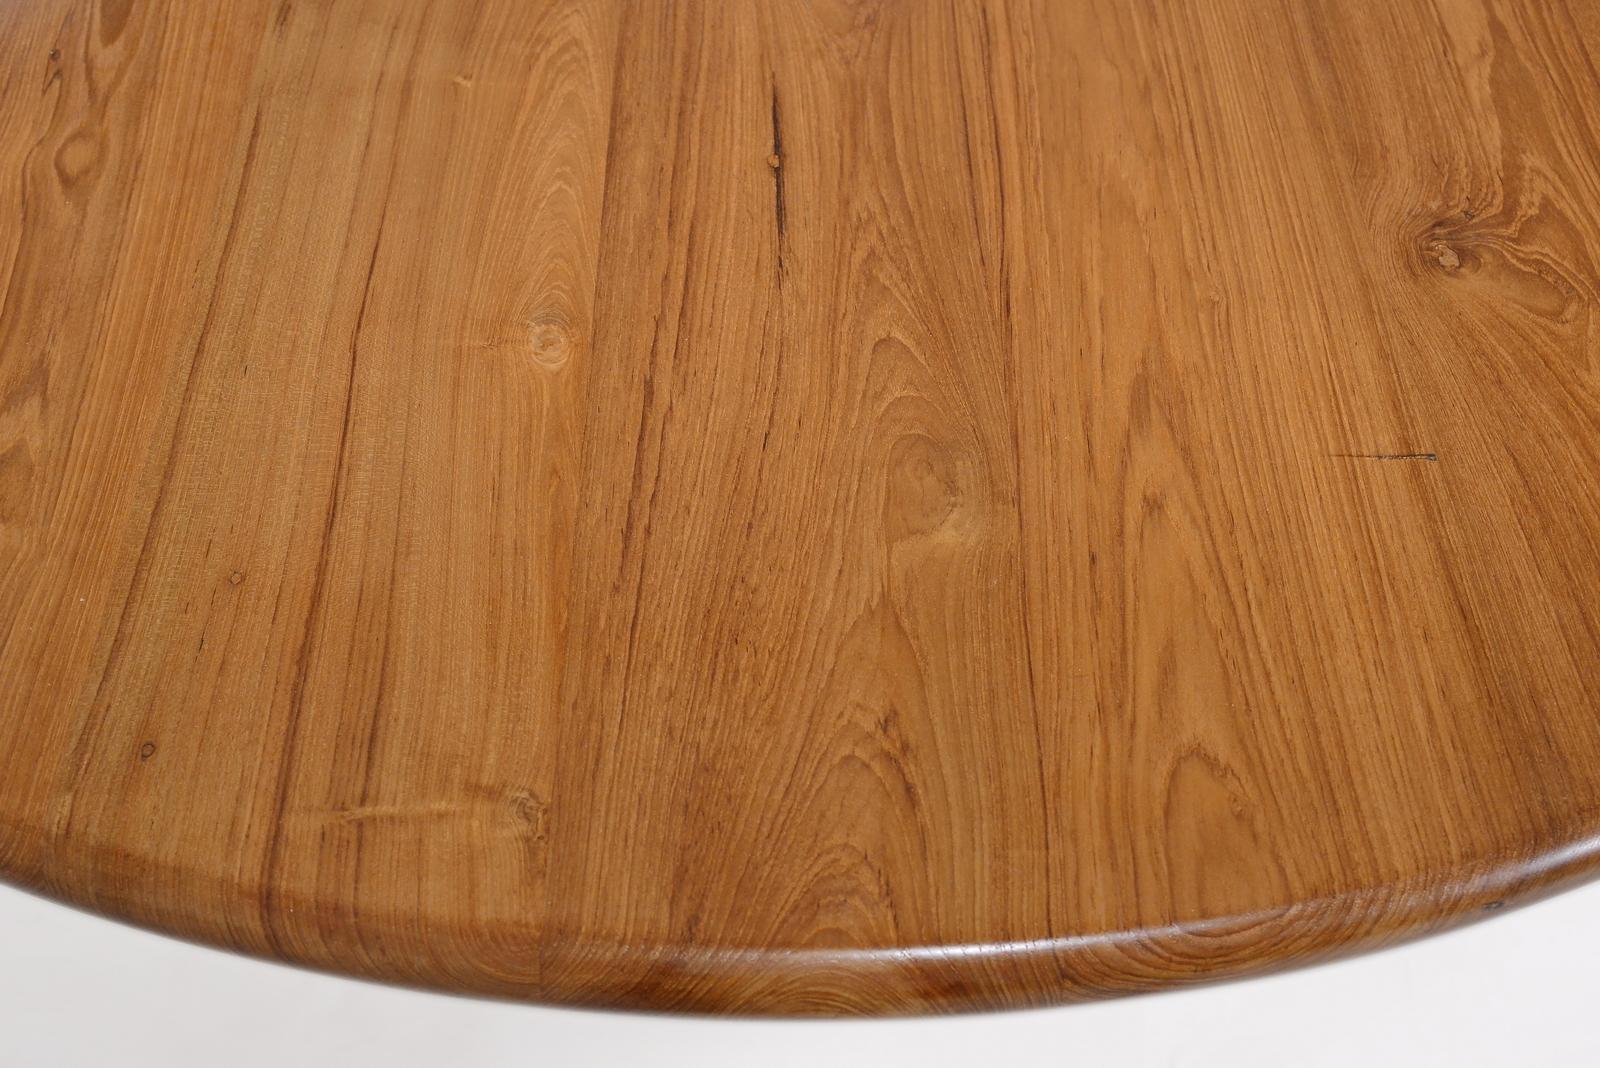 Hand-Crafted Bespoke Round Table with Wood Base, Reclaimed Teak Wood, by P. Tendercool For Sale